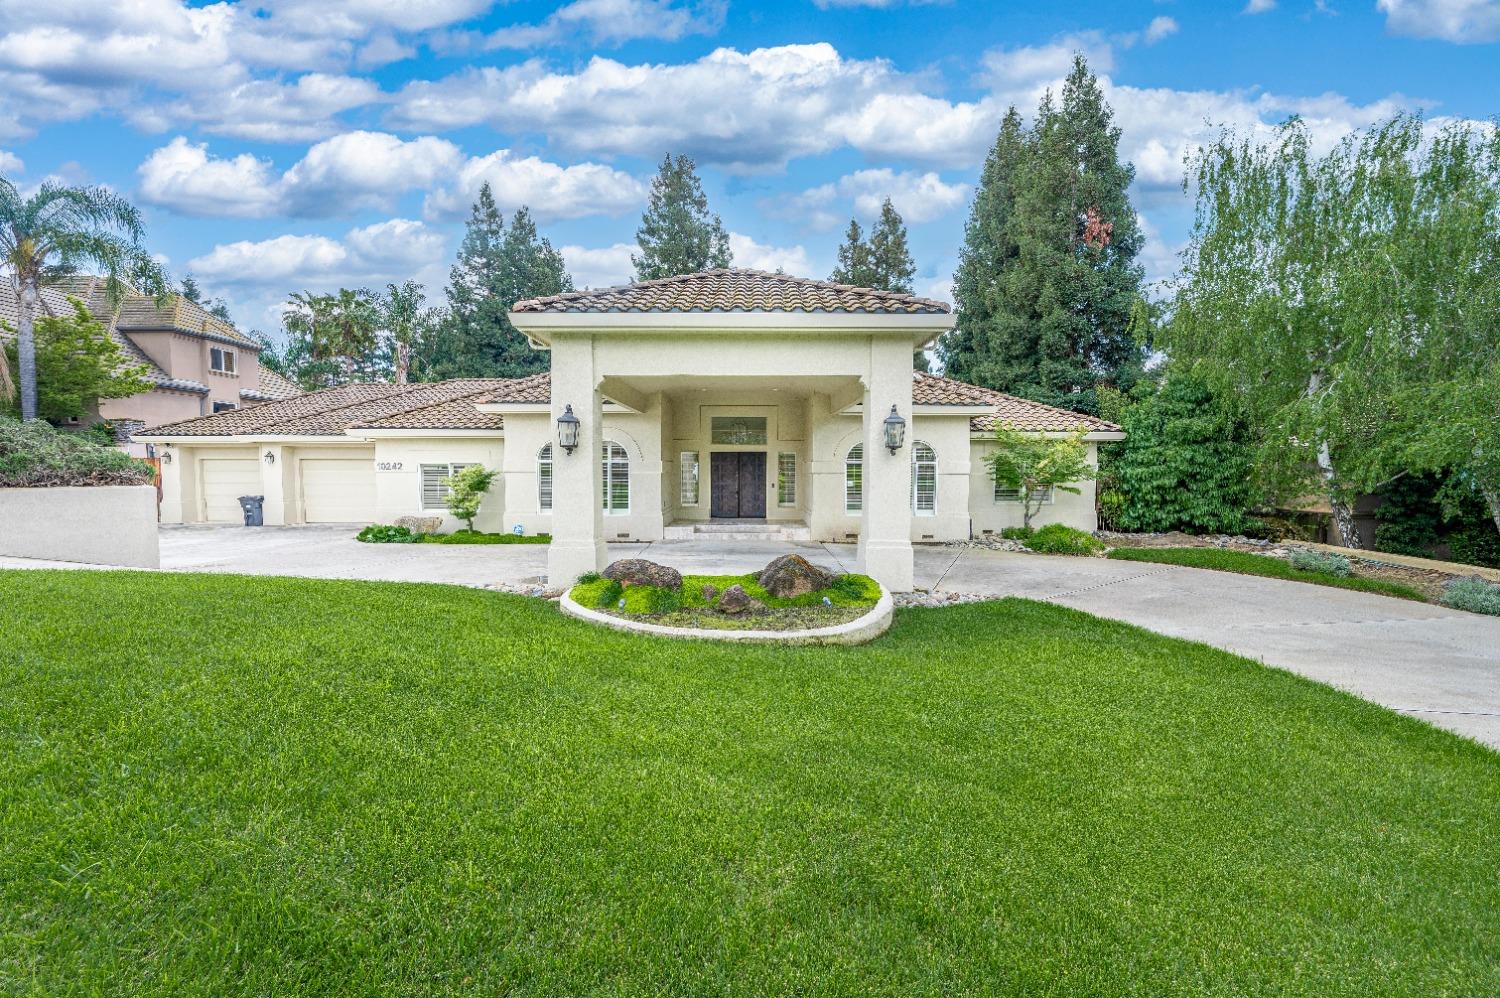 Photo of 10242 Whitetail Dr in Oakdale, CA